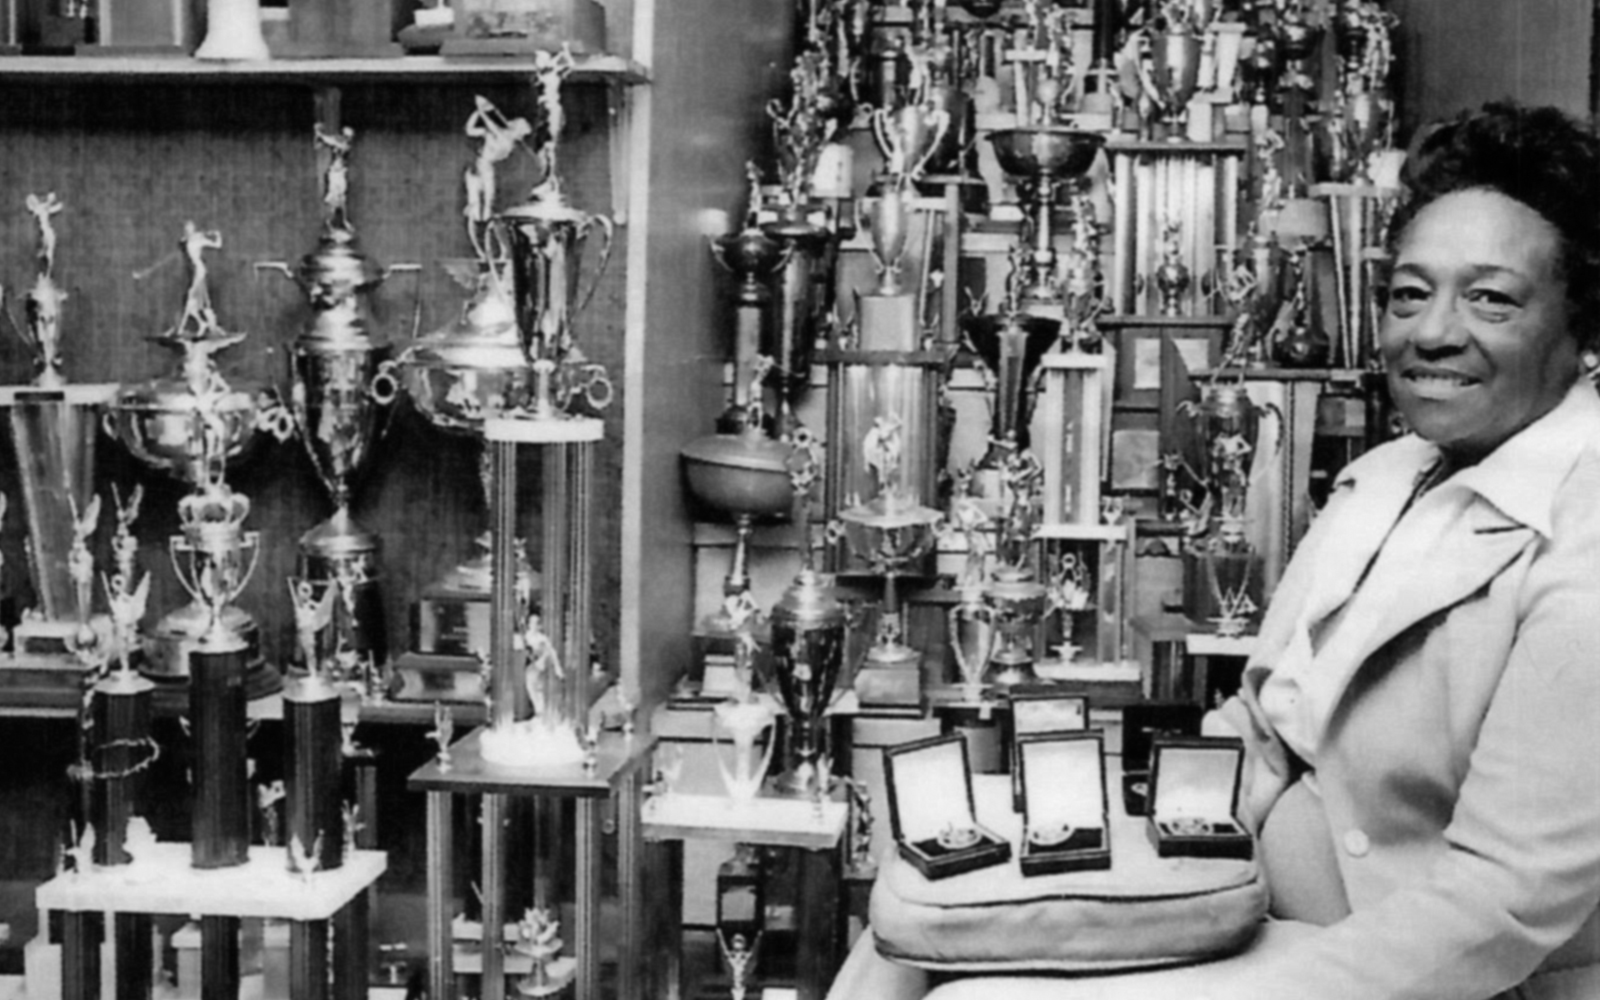 Ann Gregory with her many Championship Trophies